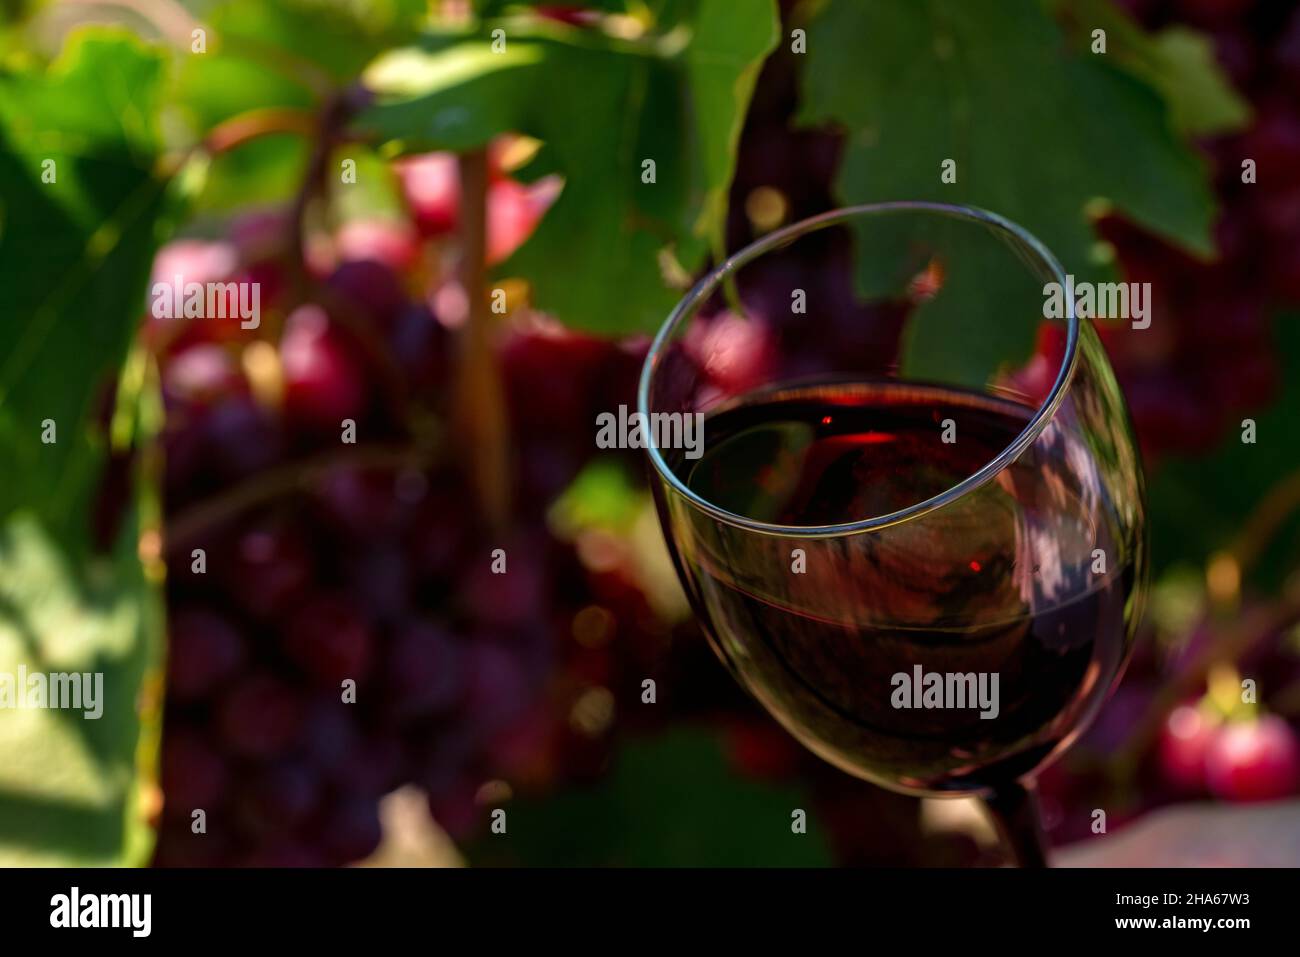 Wine production concept - glass of redwine next to ripe grapes on vine. Stock Photo